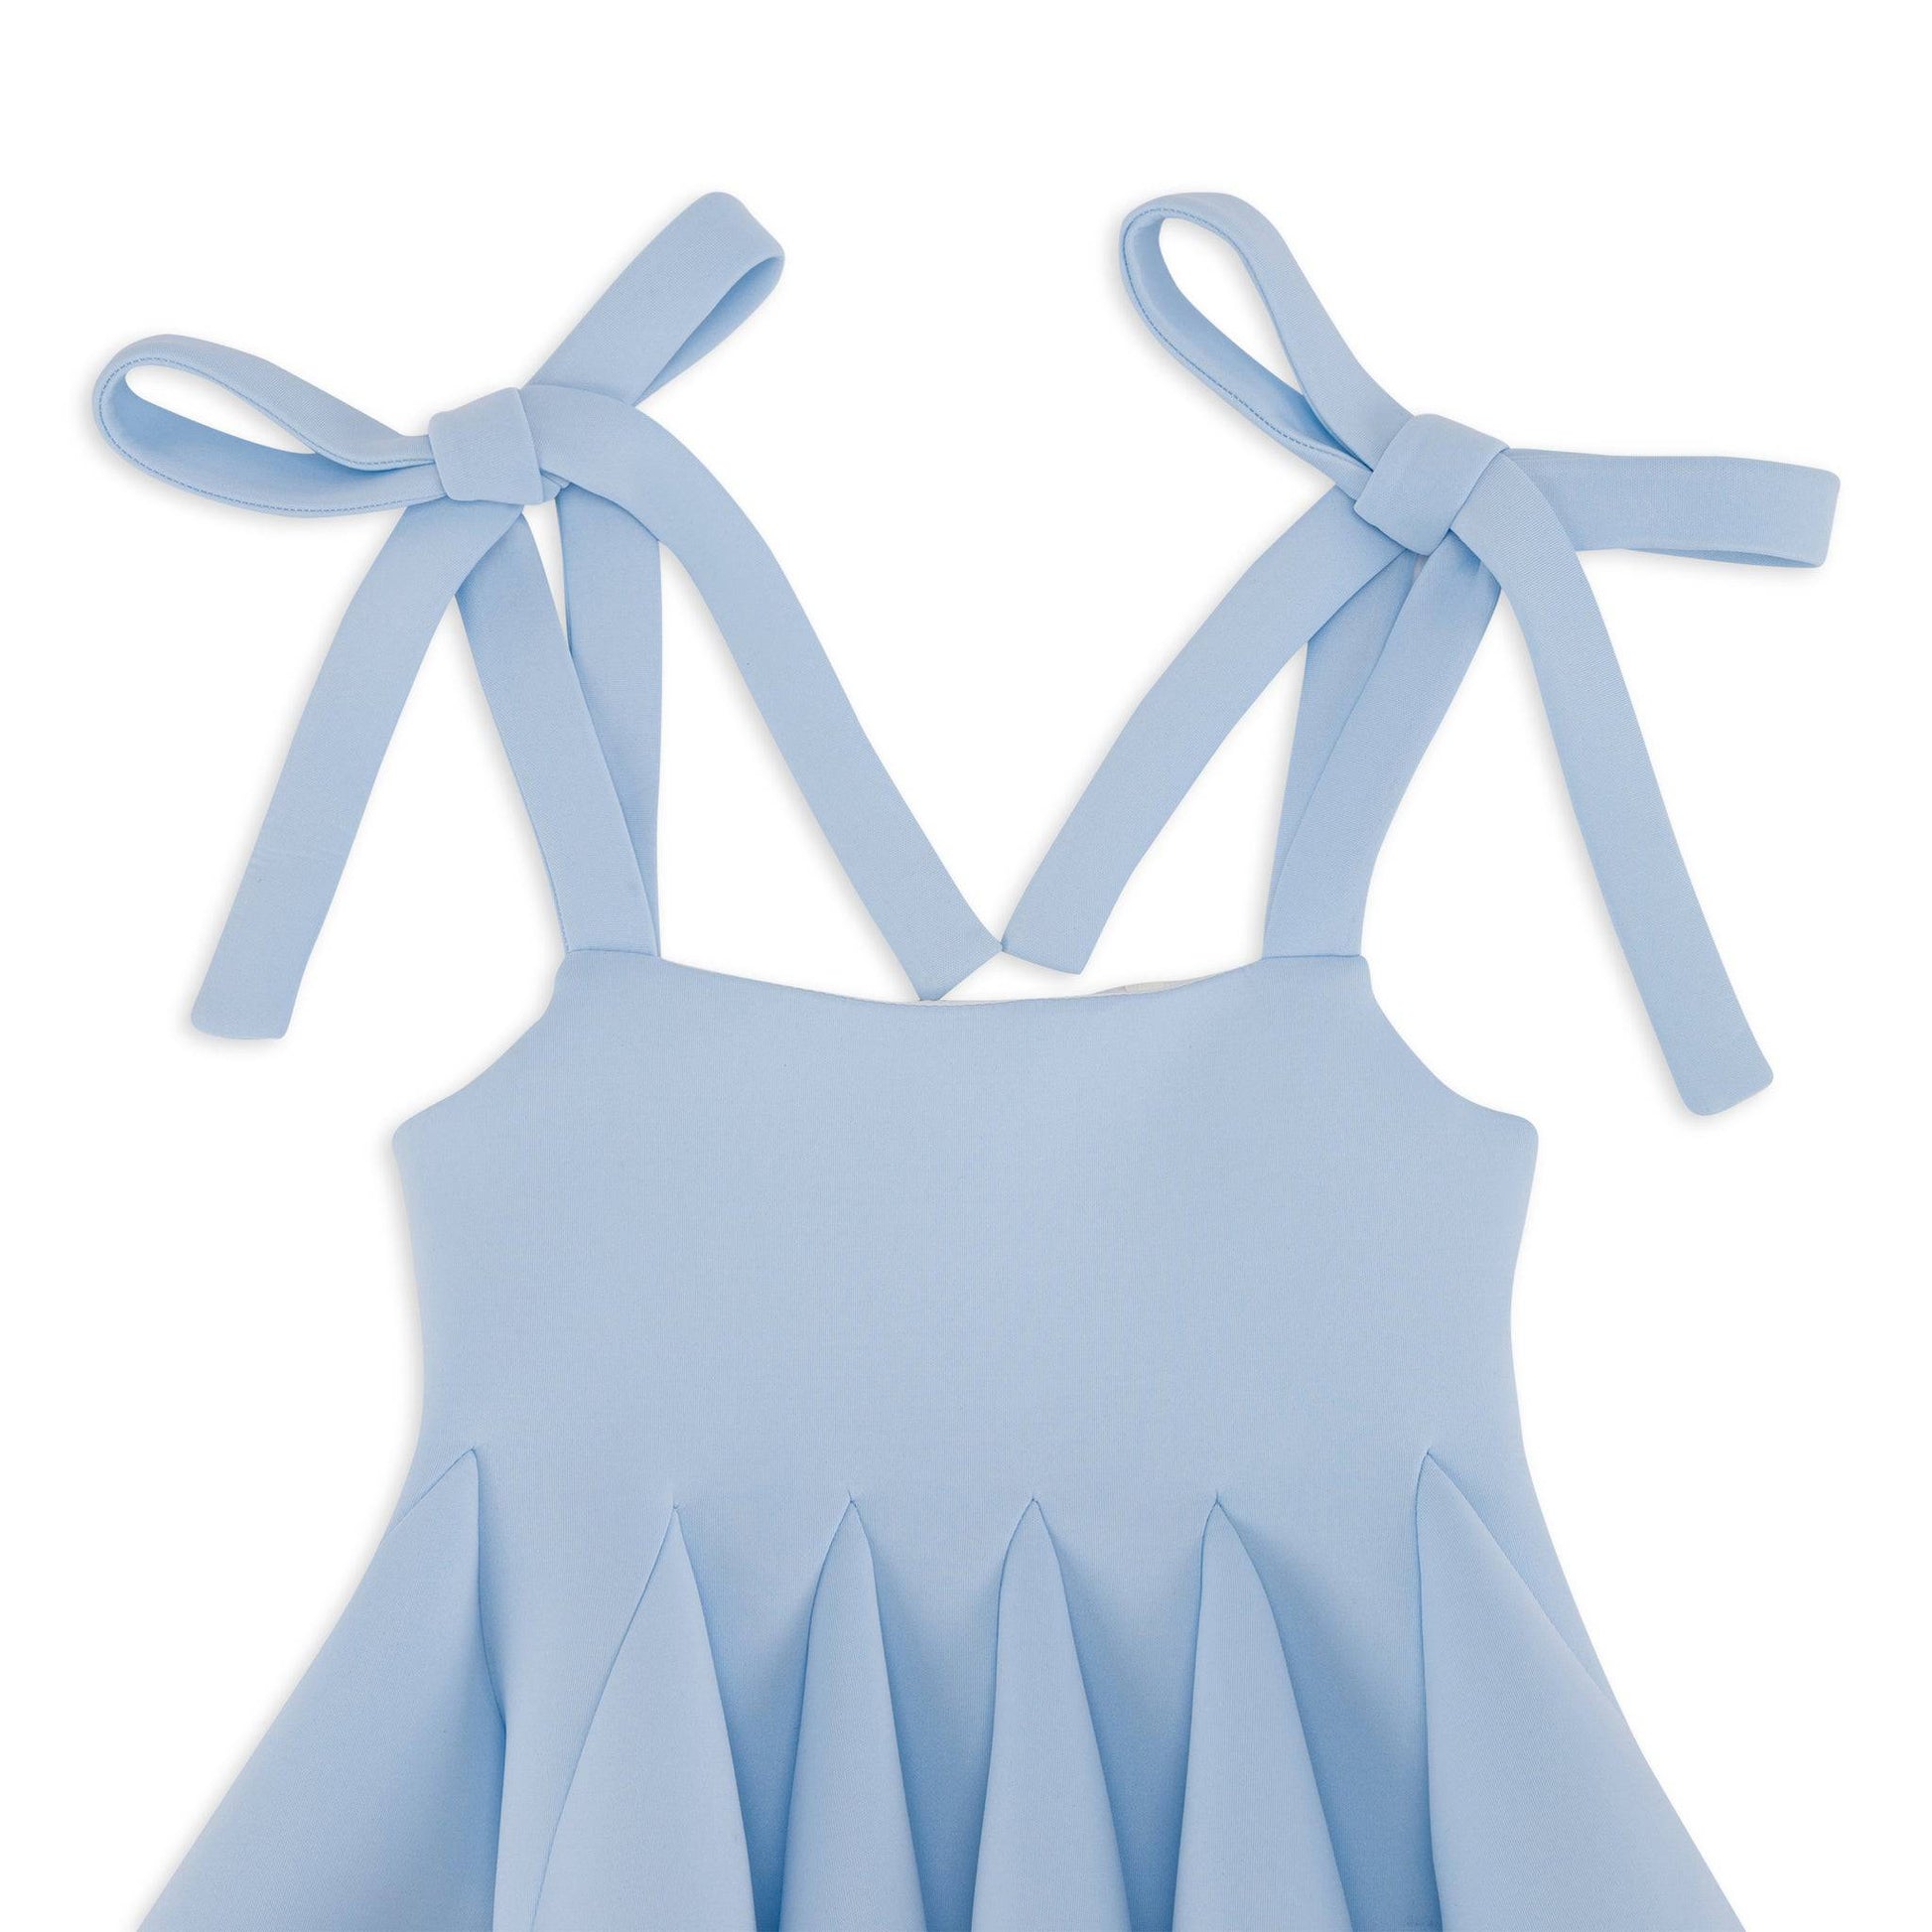 occasions or everyday wear dress  for little girl  and toddlers in pink and blue, فساتين اطفال فخمه